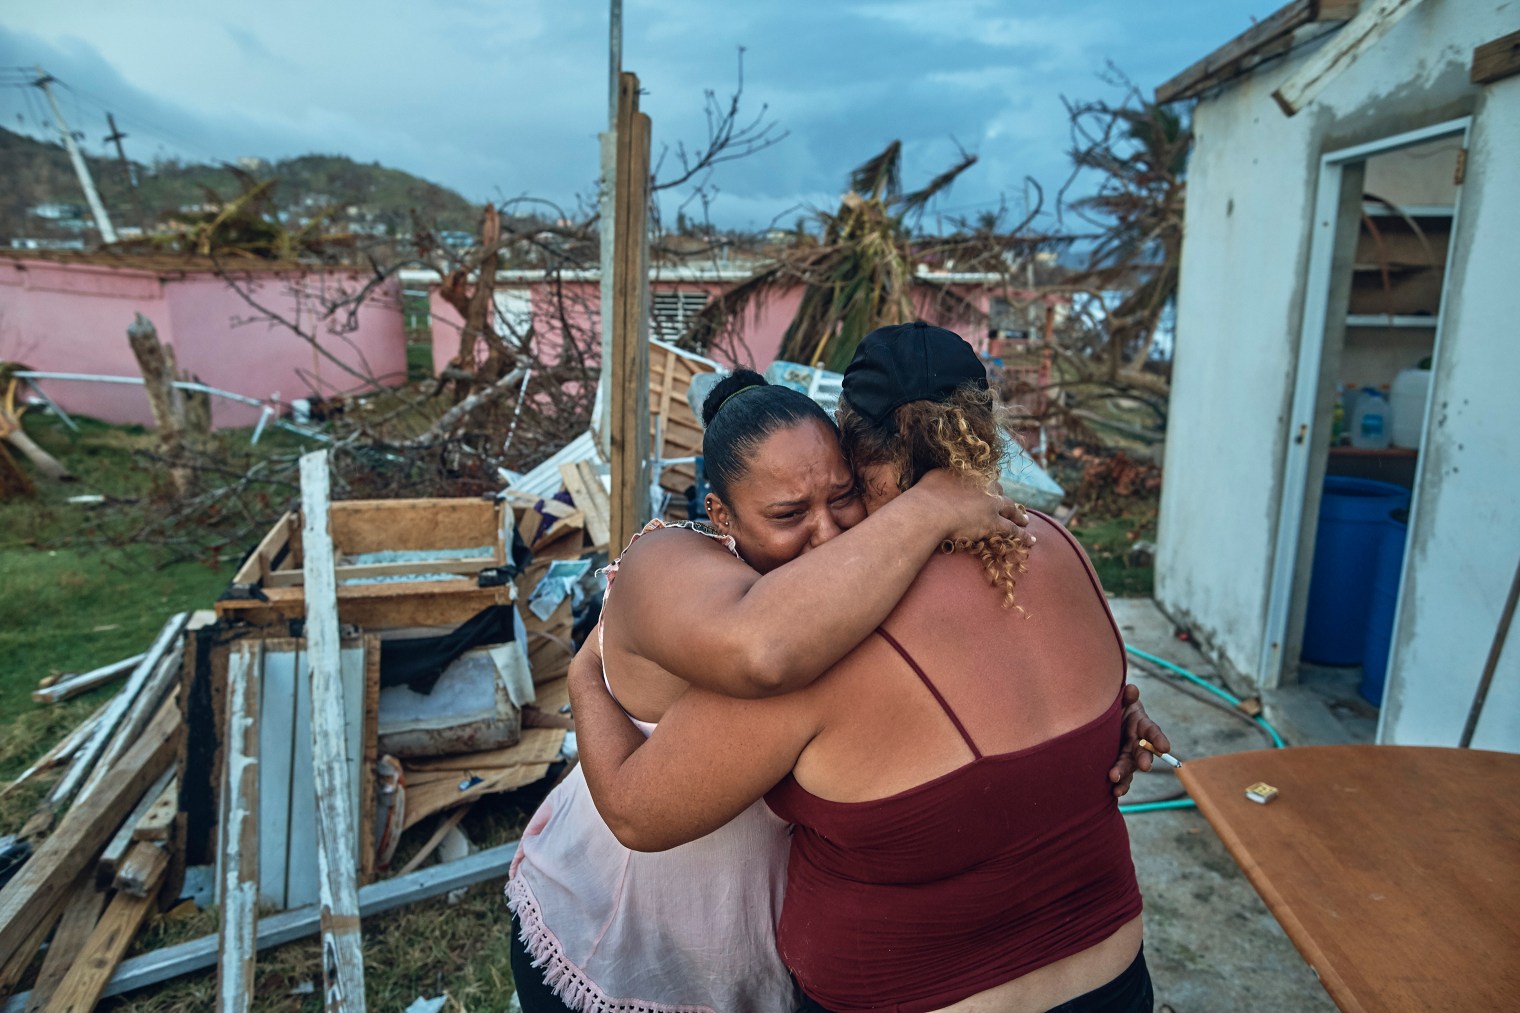 Sheila Sustache, 37, cries and hugs her aunt Yasmin Morales Torres, 41, after seeing the damage to their houses in Yabucoa, Puerto Rico, on Sept. 29, 2017.